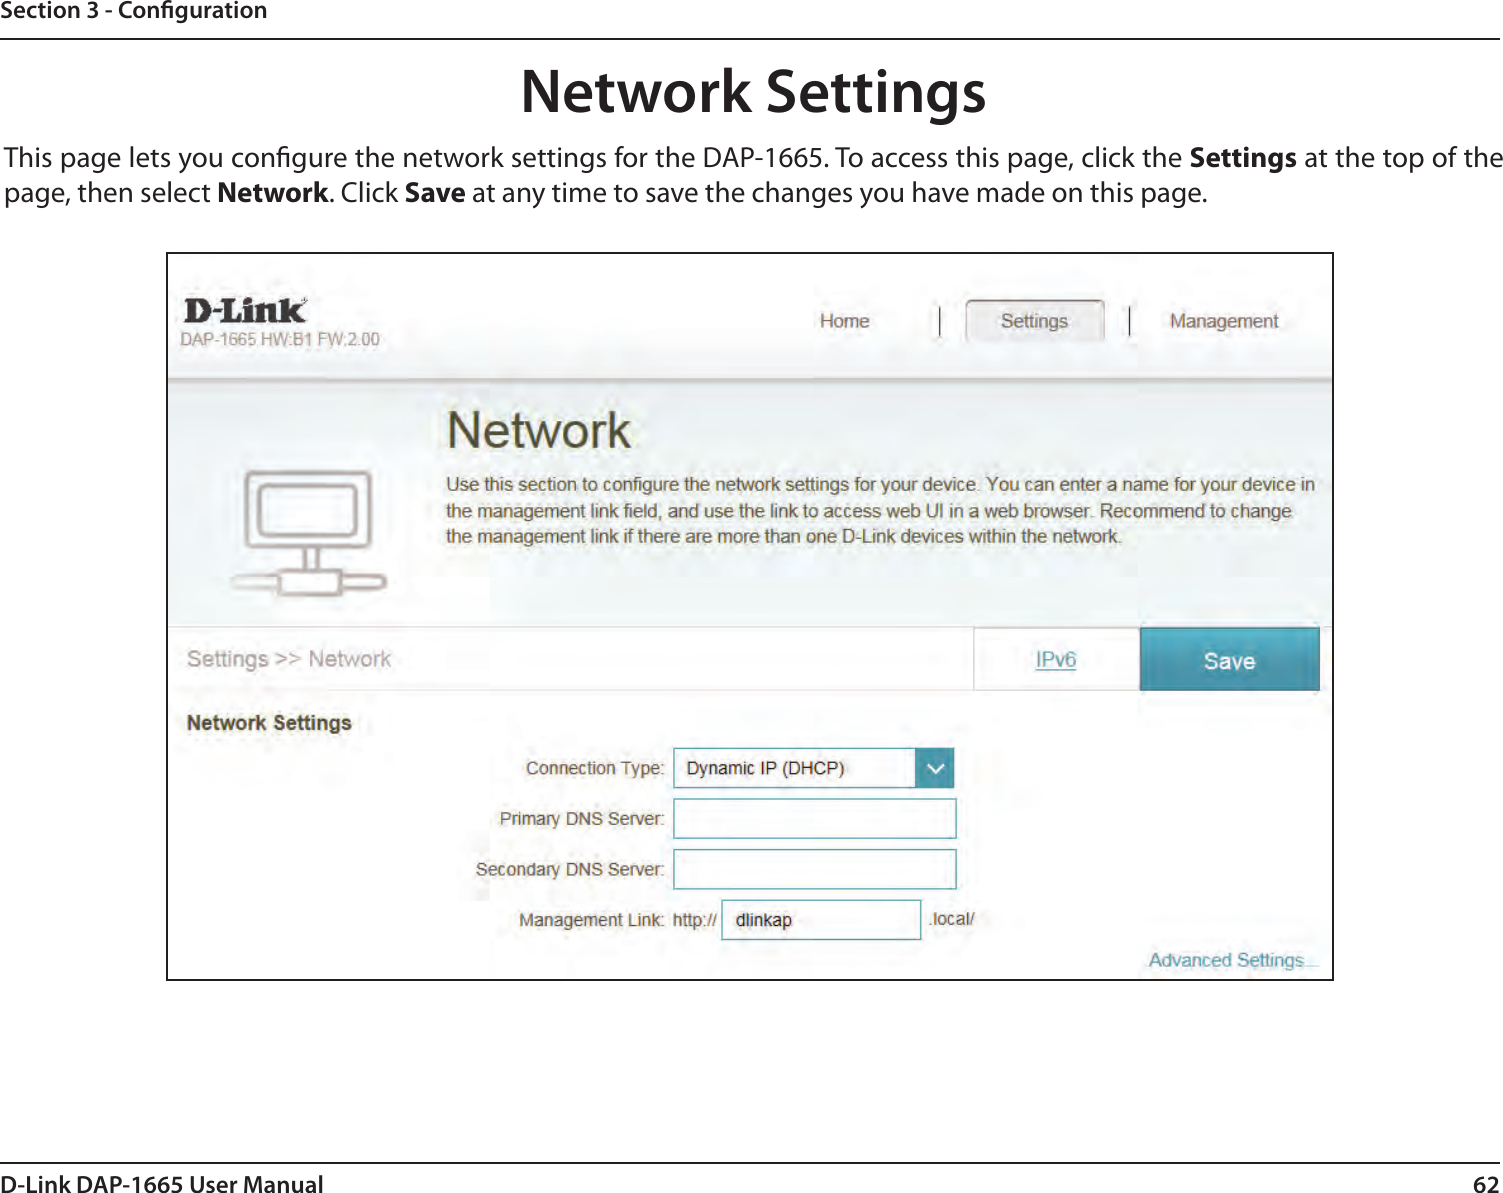 62D-Link DAP-1665 User ManualSection 3 - CongurationNetwork SettingsThis page lets you congure the network settings for the DAP-1665. To access this page, click the Settings at the top of the page, then select Network. Click Save at any time to save the changes you have made on this page.